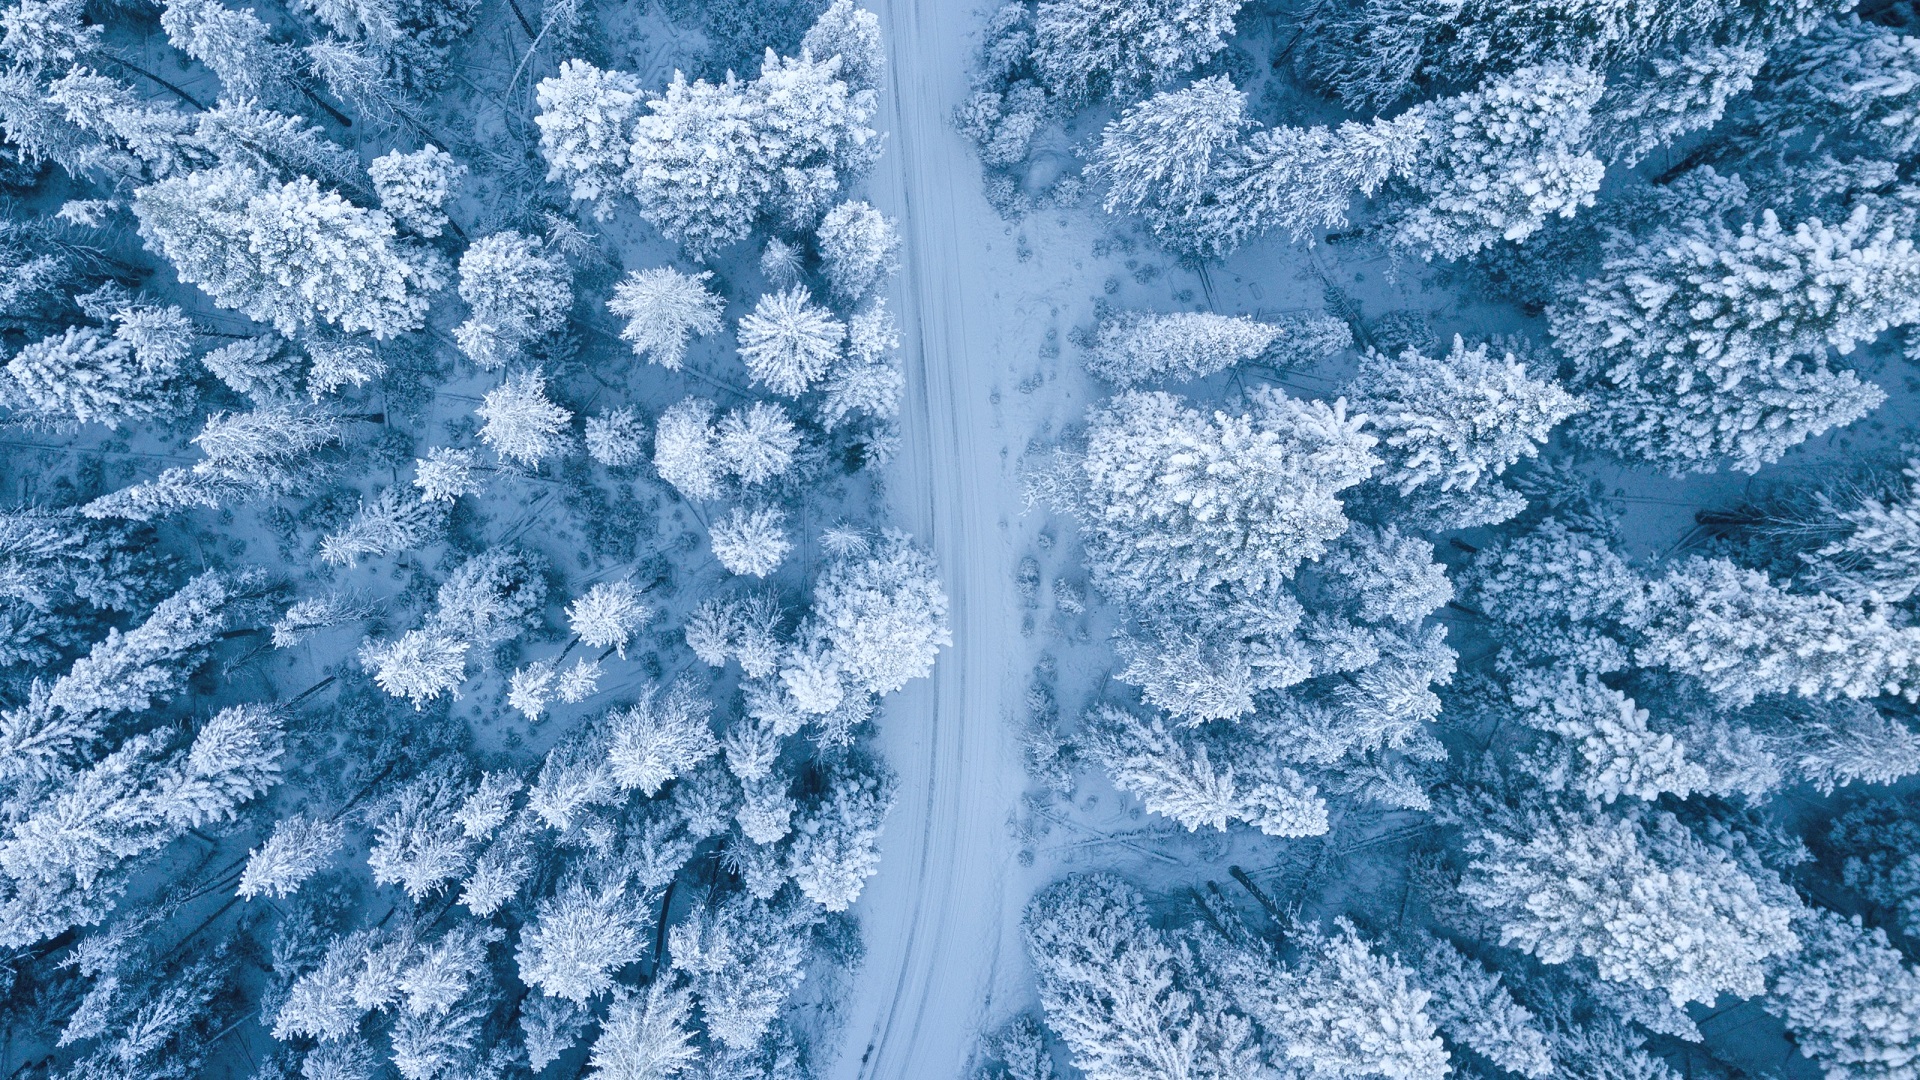 General 1920x1080 nature snow trees forest winter aerial view road